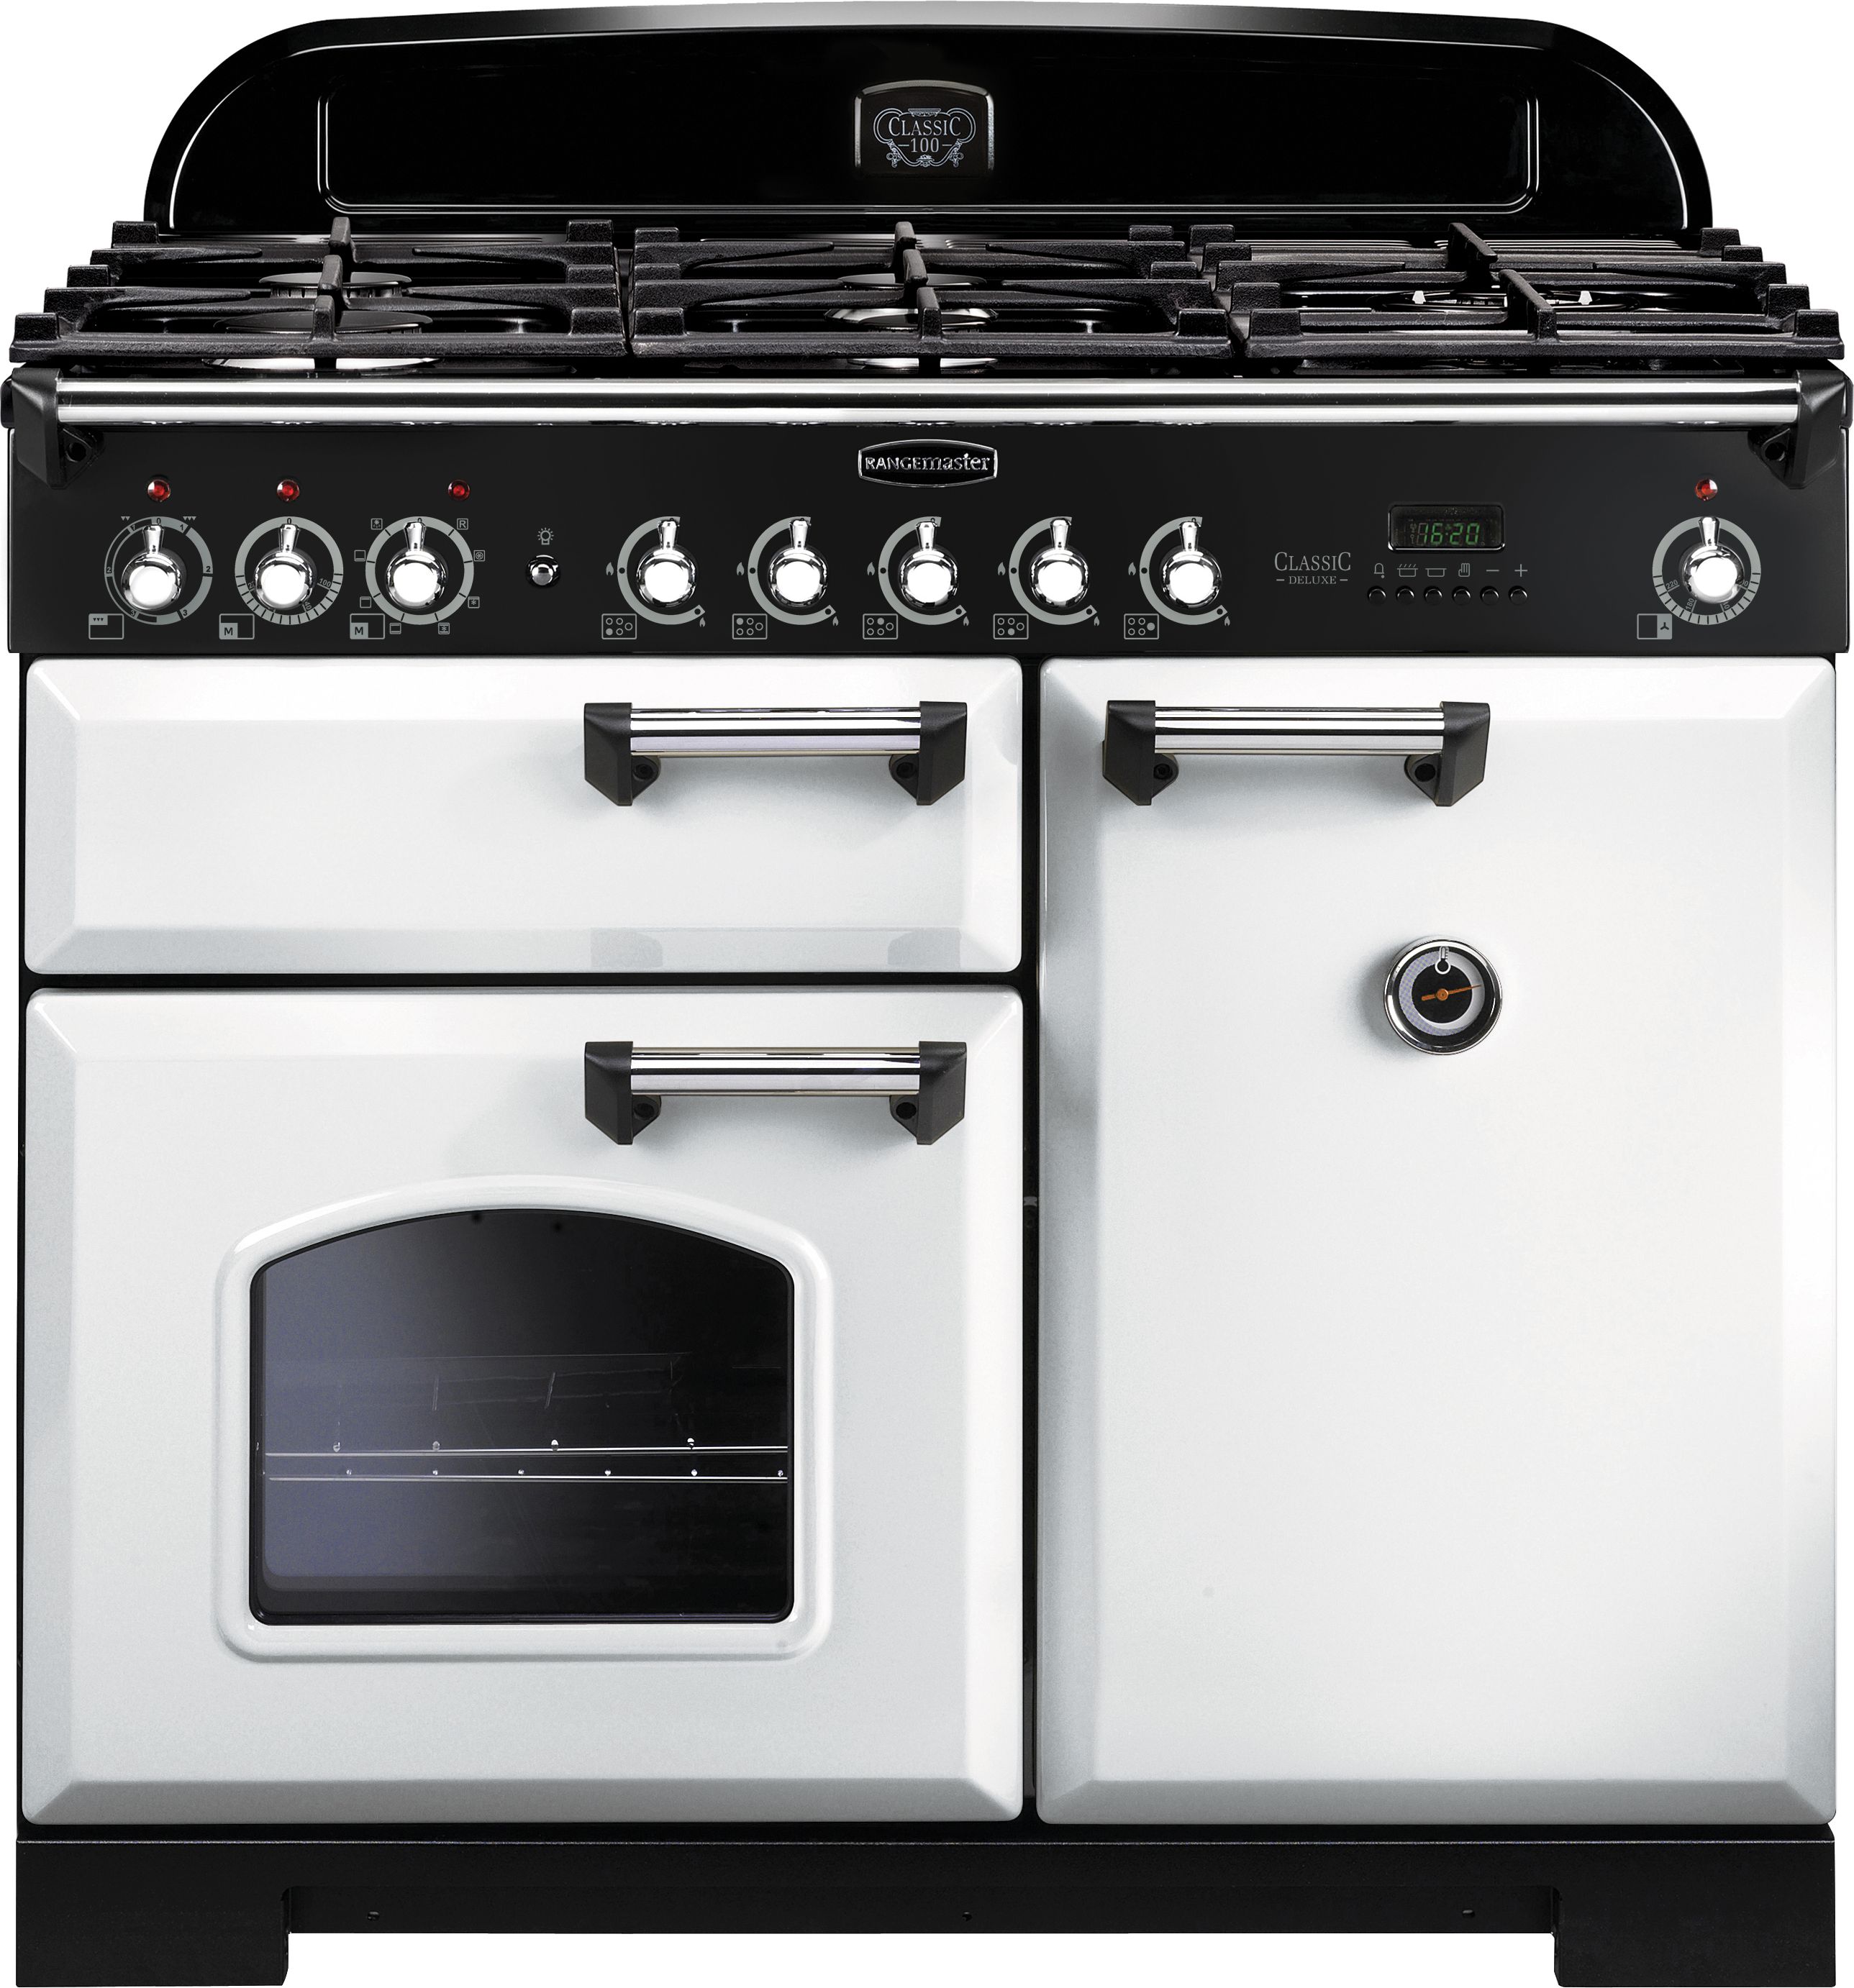 Rangemaster Classic Deluxe CDL100DFFWH/C 100cm Dual Fuel Range Cooker - White / Chrome - A/A Rated, White